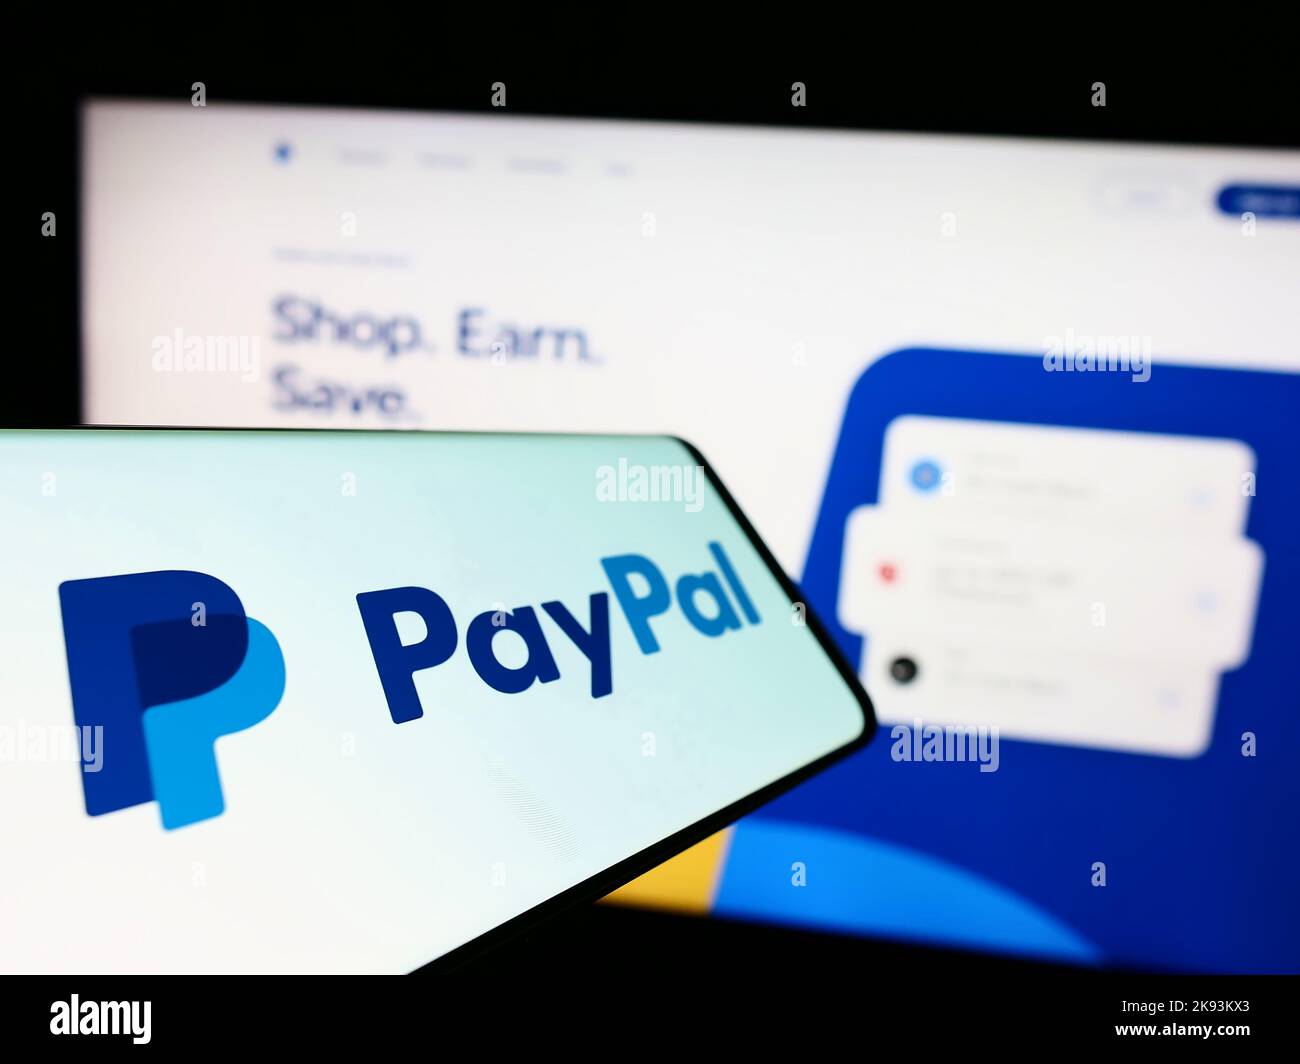 Smartphone with logo of American financial company PayPal Holdings Inc. on screen in front of website. Focus on center-left of phone display. Stock Photo